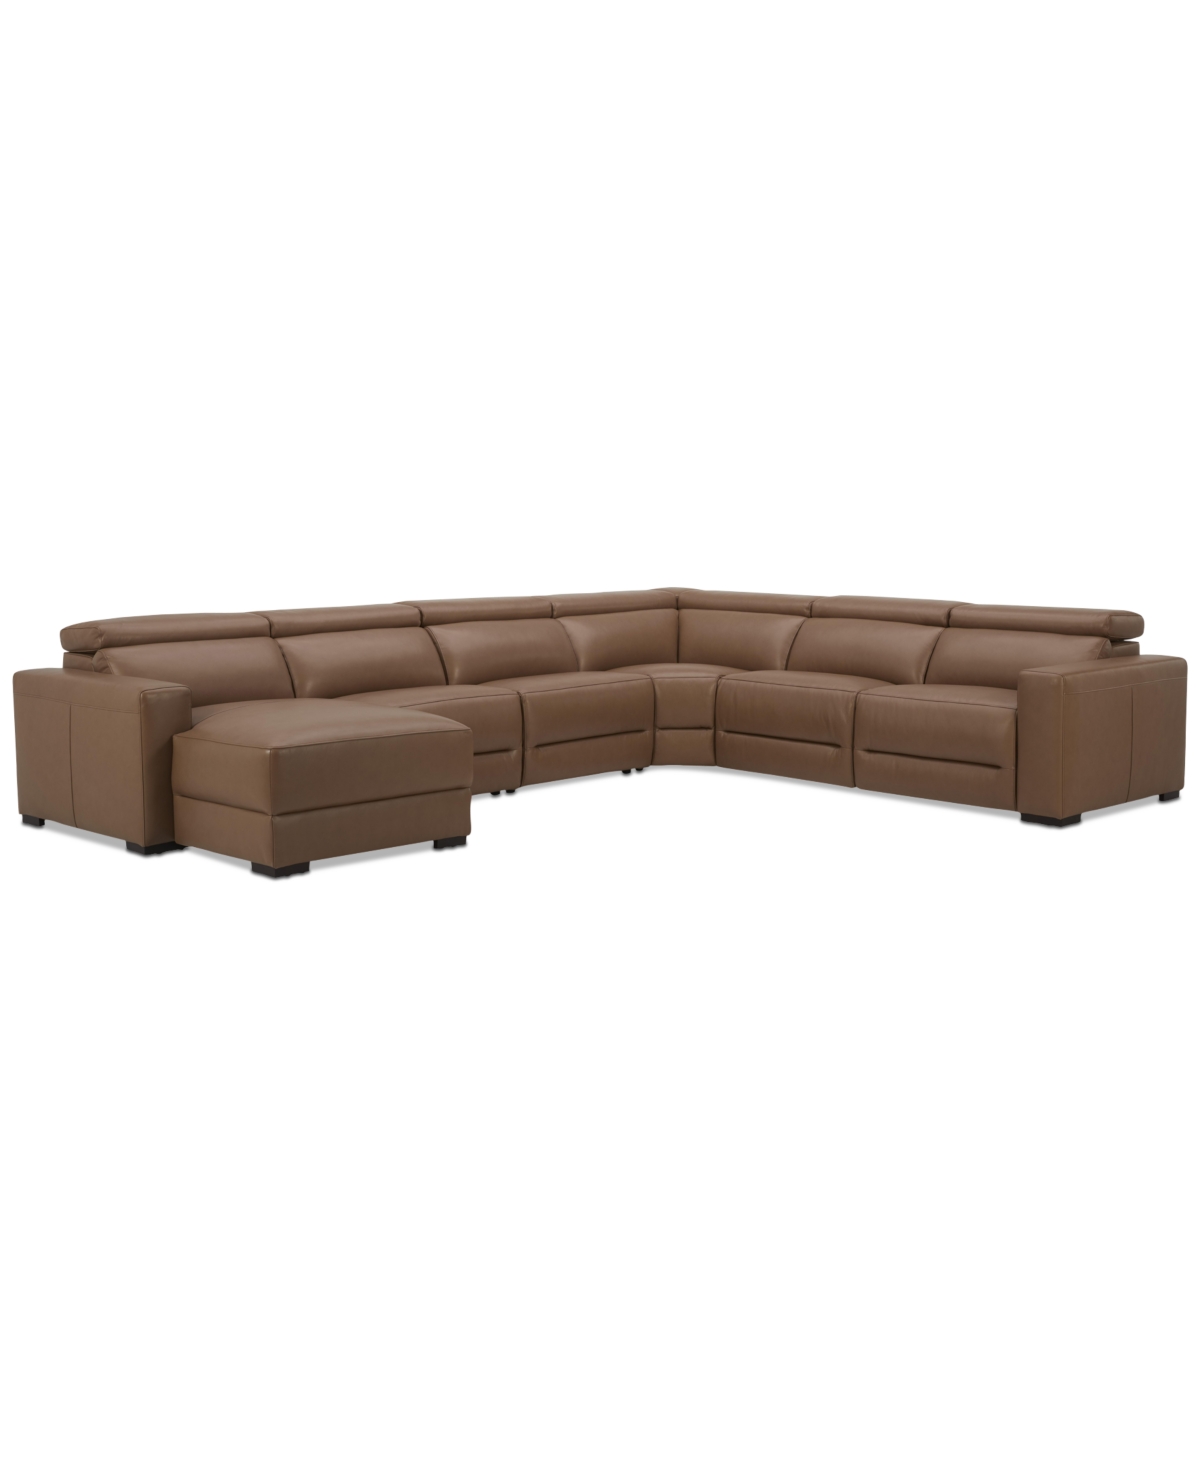 Macy's Nevio 157" 6-pc. Leather Sectional With 1 Power Recliner, Headrests And Chaise, Created For  In Butternut